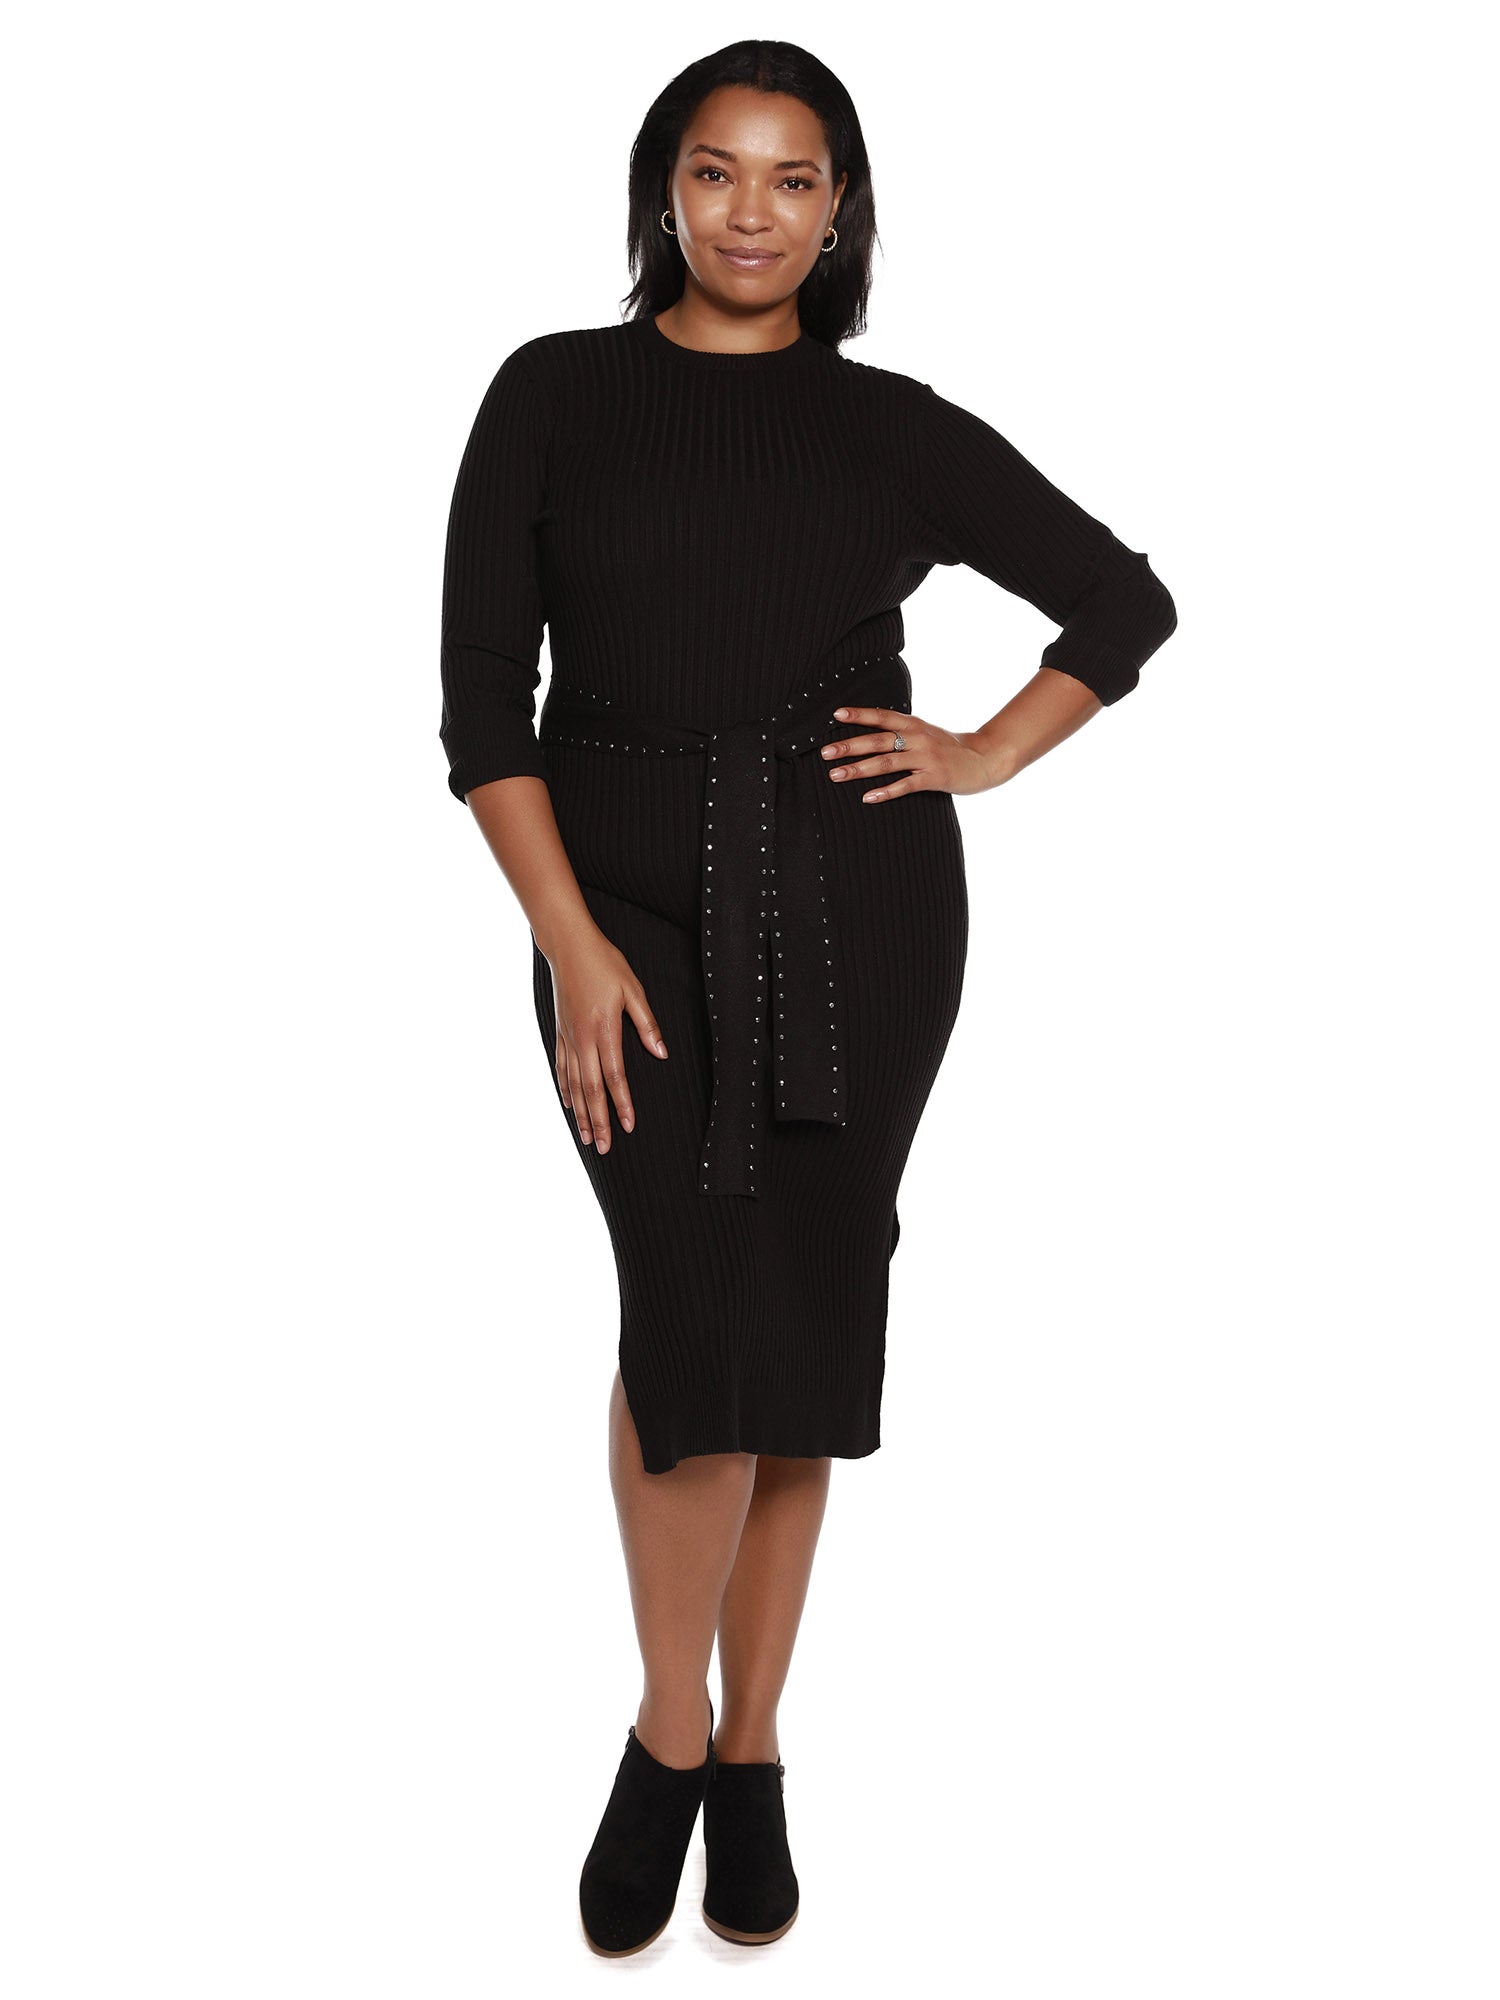 Women's Body Con Sweater Dress with 3/4 Sleeves and Embellished Belt | Curvy